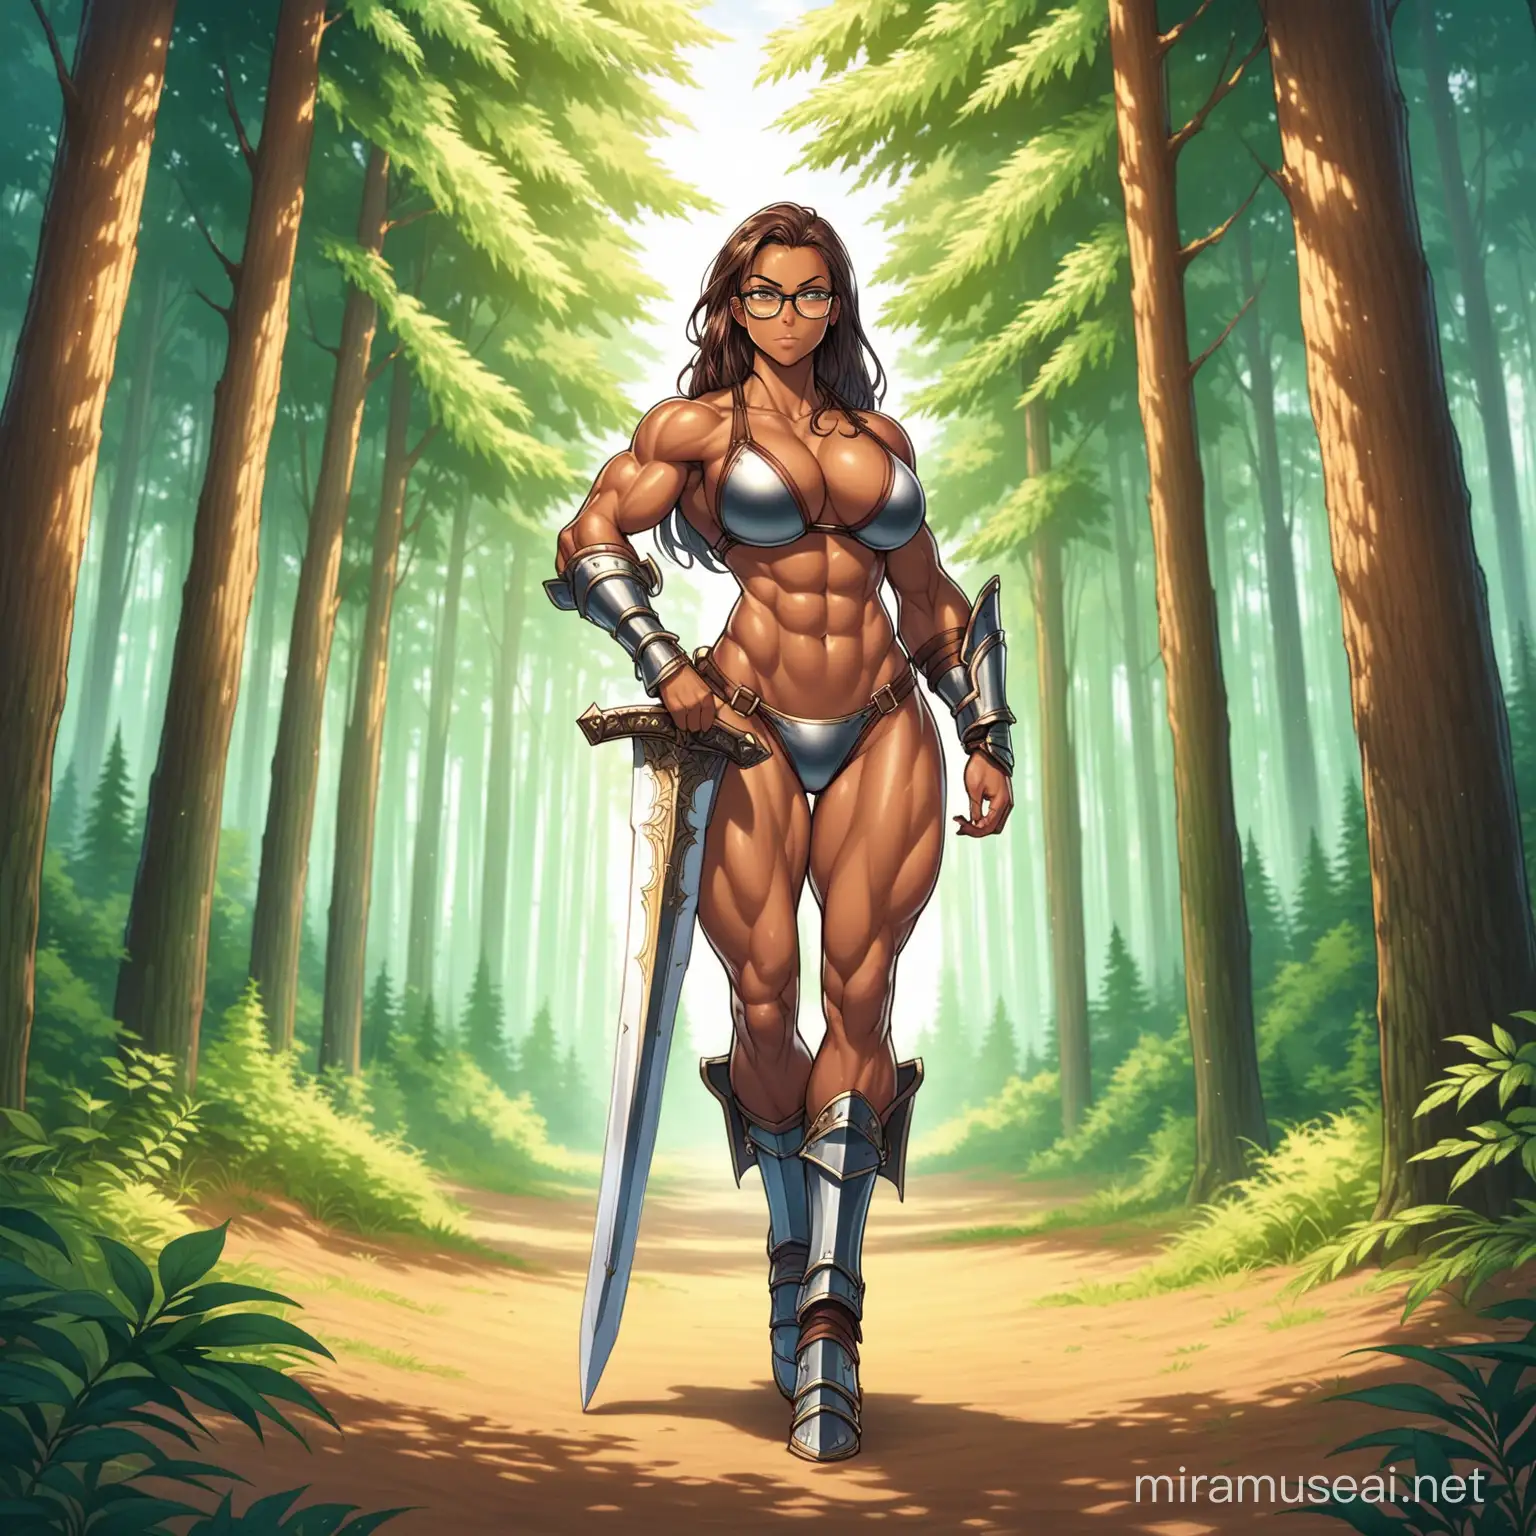 Female, glasses,athletic, tonedmuscular,full body tan, large bust, armored bikini,large sword in right hand,forest